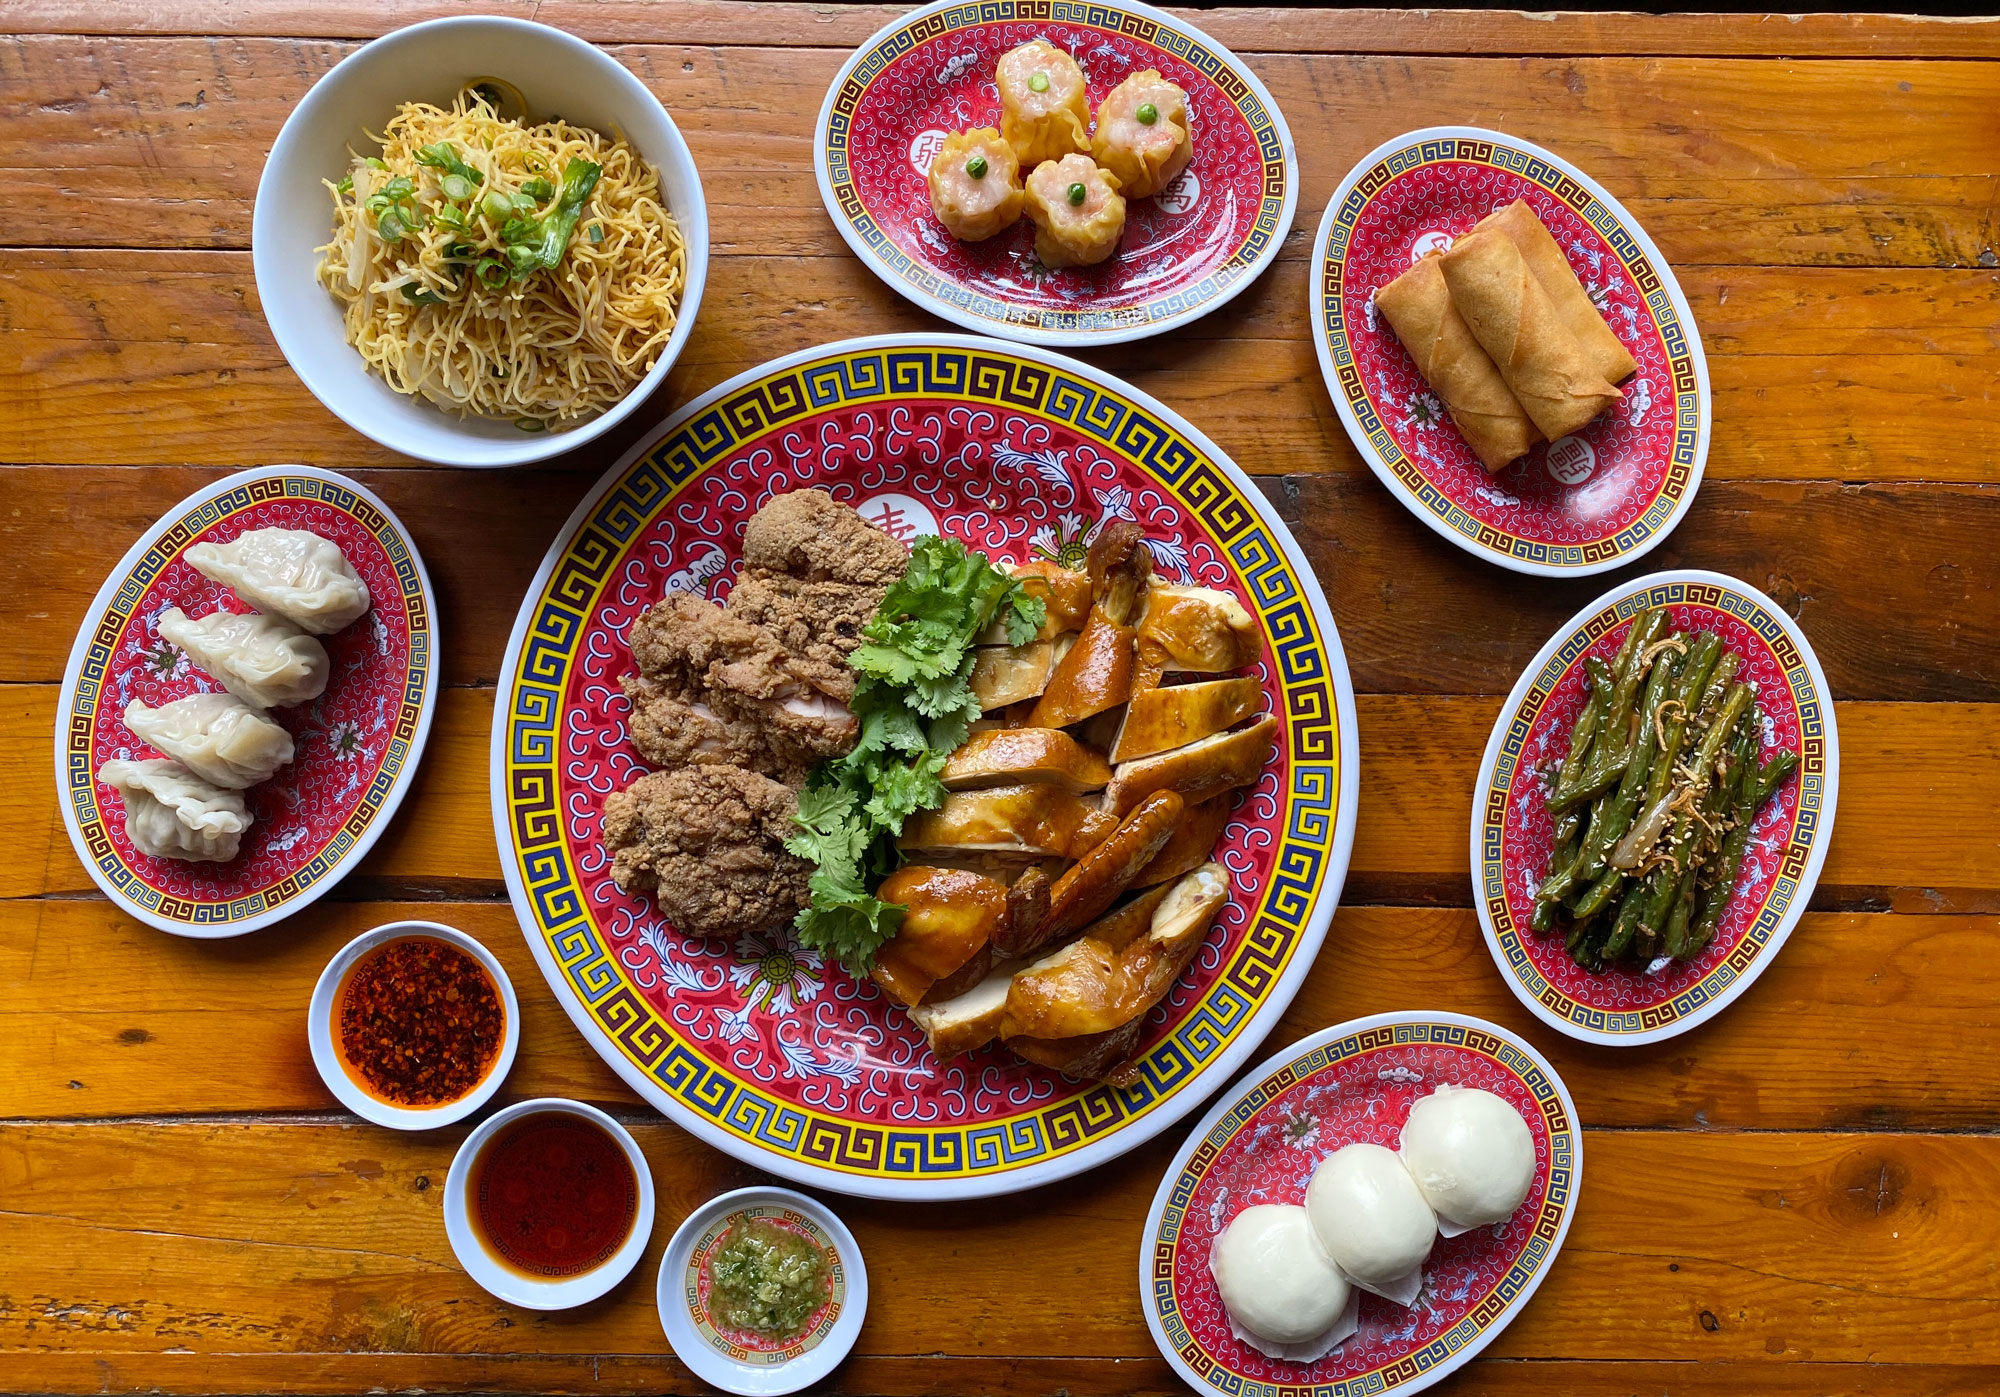 Lunar New Year dinner available at Nom Wah Nolita for the Year of the Ox